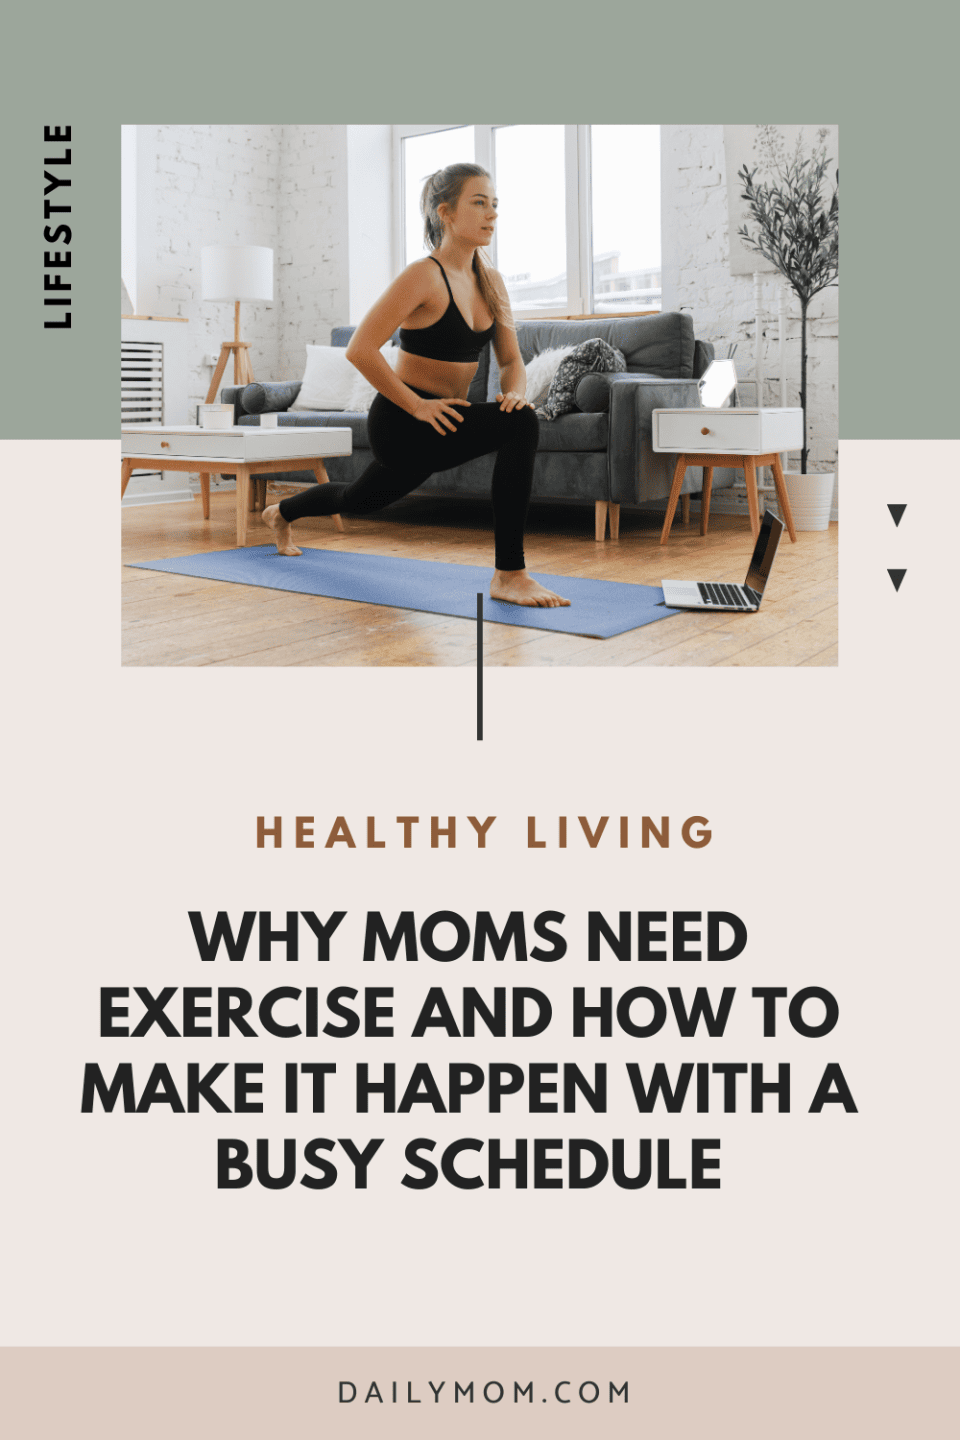 Why Busy Moms Need Exercise - How to Get in Quick Home Workouts for Busy Working Moms Regardless of Your Schedule  1 Daily Mom, Magazine for Families